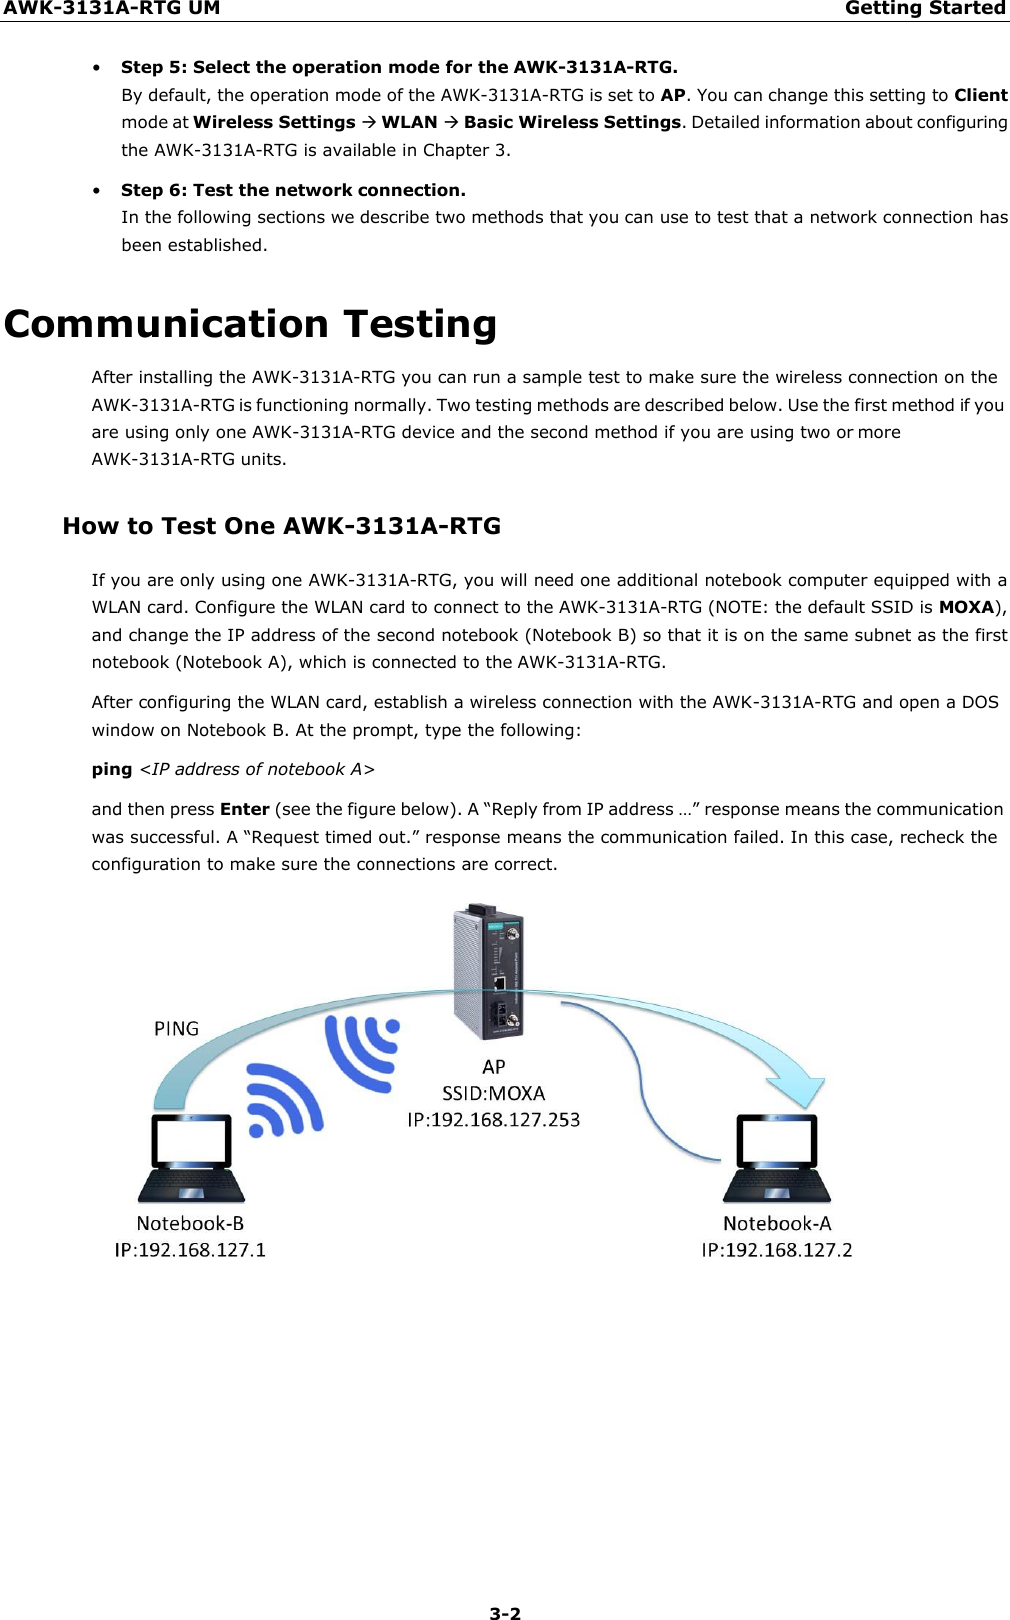 AWK-3131A-RTG UM Getting Started 3-2    • Step 5: Select the operation mode for the AWK-3131A-RTG. By default, the operation mode of the AWK-3131A-RTG is set to AP. You can change this setting to Client mode at Wireless Settings  WLAN  Basic Wireless Settings. Detailed information about configuring the AWK-3131A-RTG is available in Chapter 3. • Step 6: Test the network connection. In the following sections we describe two methods that you can use to test that a network connection has been established.  Communication Testing After installing the AWK-3131A-RTG you can run a sample test to make sure the wireless connection on the AWK-3131A-RTG is functioning normally. Two testing methods are described below. Use the first method if you are using only one AWK-3131A-RTG device and the second method if you are using two or more AWK-3131A-RTG units.  How to Test One AWK-3131A-RTG  If you are only using one AWK-3131A-RTG, you will need one additional notebook computer equipped with a WLAN card. Configure the WLAN card to connect to the AWK-3131A-RTG (NOTE: the default SSID is MOXA), and change the IP address of the second notebook (Notebook B) so that it is on the same subnet as the first notebook (Notebook A), which is connected to the AWK-3131A-RTG. After configuring the WLAN card, establish a wireless connection with the AWK-3131A-RTG and open a DOS window on Notebook B. At the prompt, type the following: ping &lt;IP address of notebook A&gt;  and then press Enter (see the figure below). A “Reply from IP address …” response means the communication was successful. A “Request timed out.” response means the communication failed. In this case, recheck the configuration to make sure the connections are correct.  